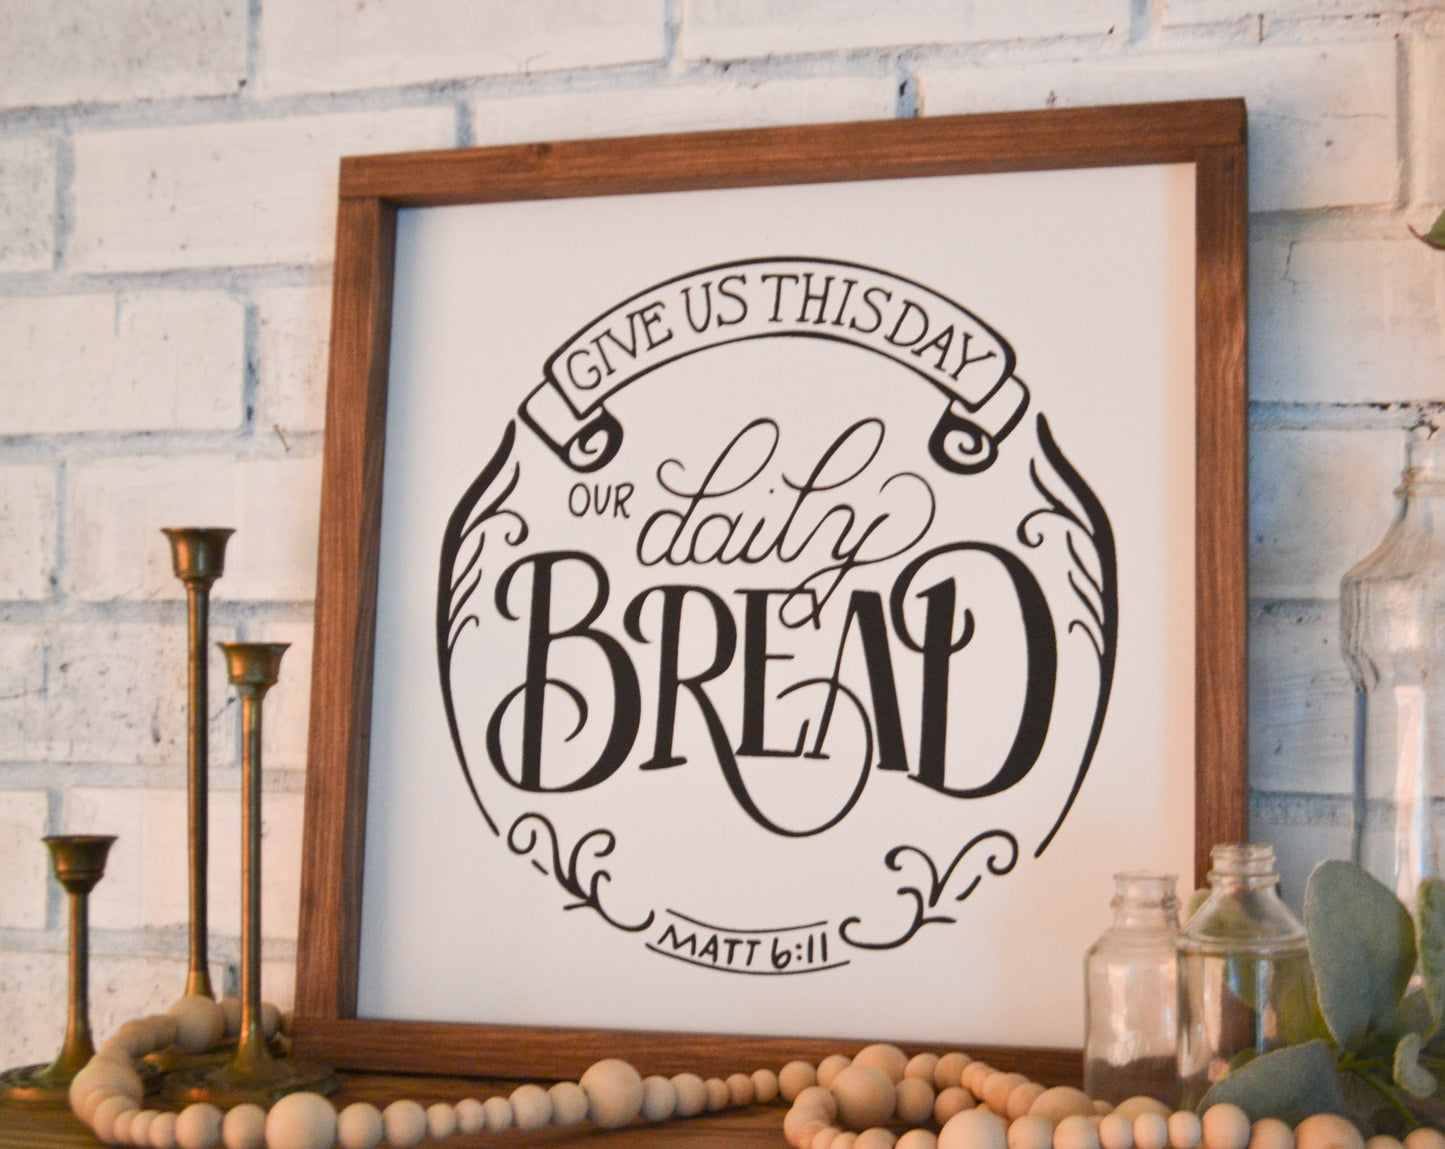 Give Us This Day Our Daily Bread Sign